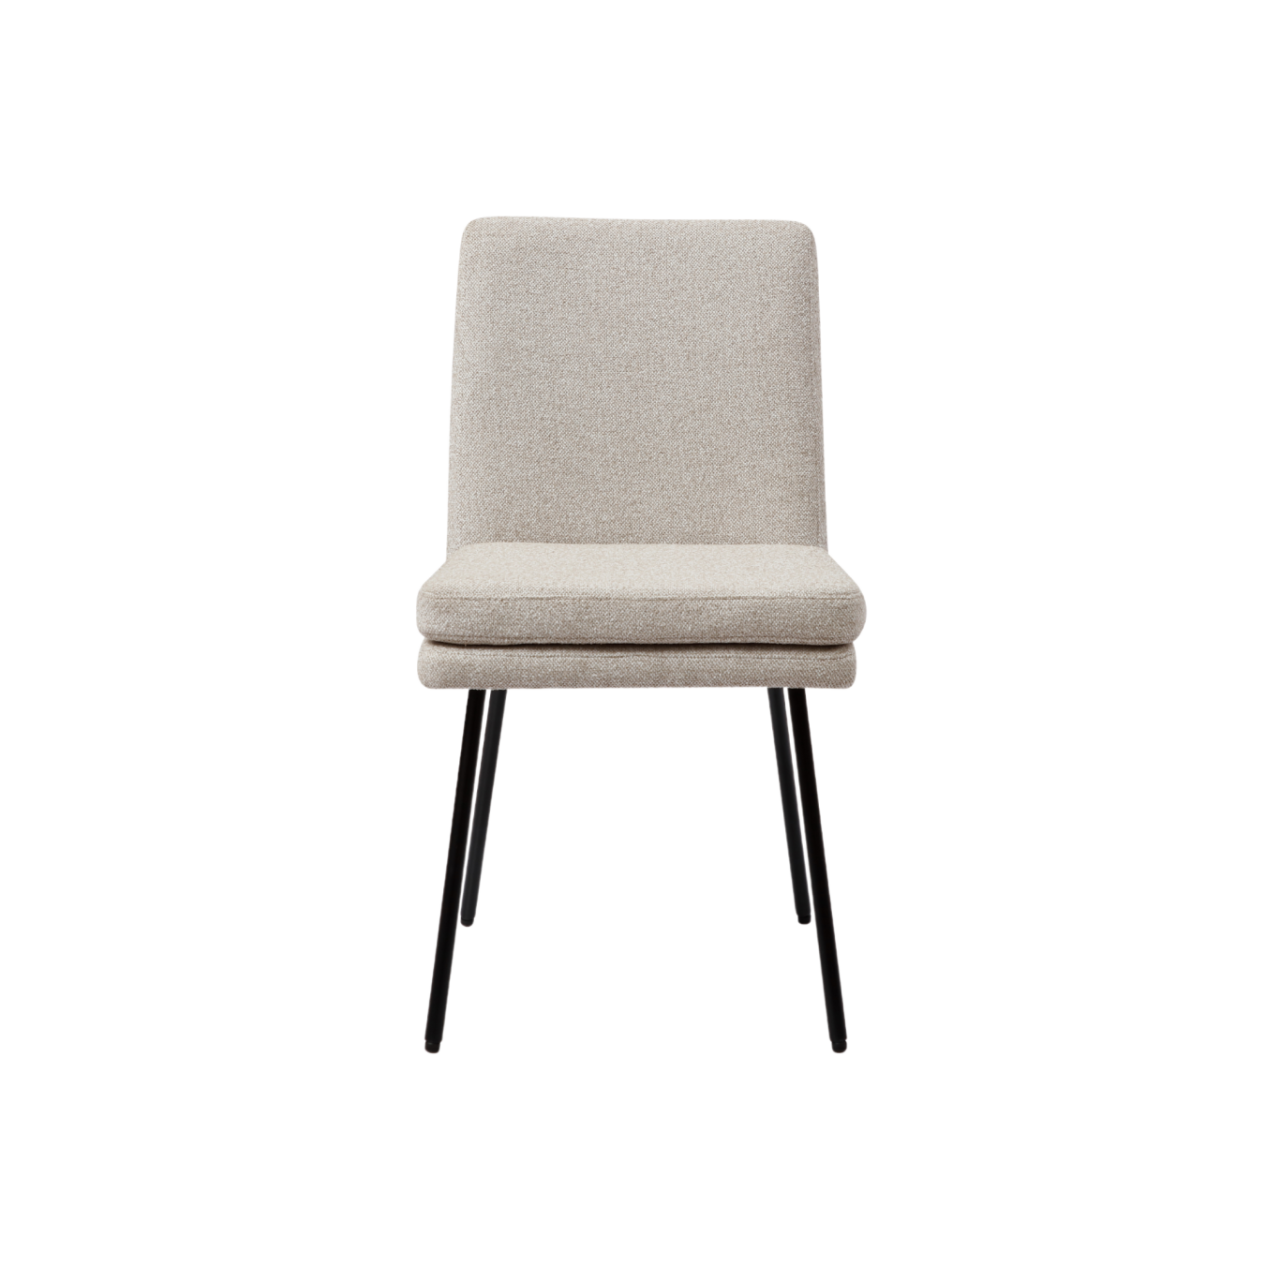 comfortable, fully upholstered minimal dining chair in mink flat weave fabric